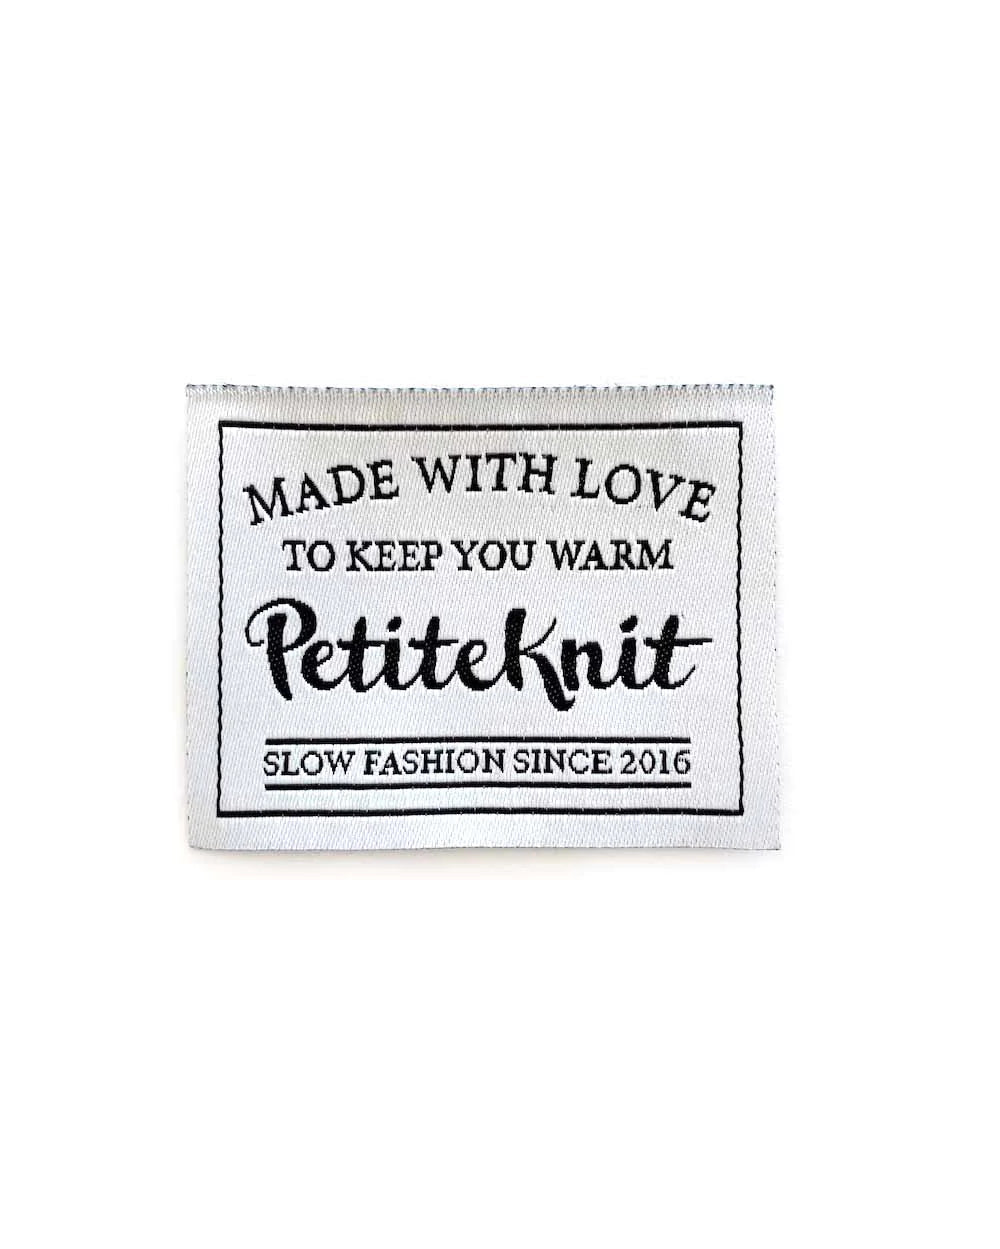 "Made With Love To Keep You Warm" Label PetiteKnit